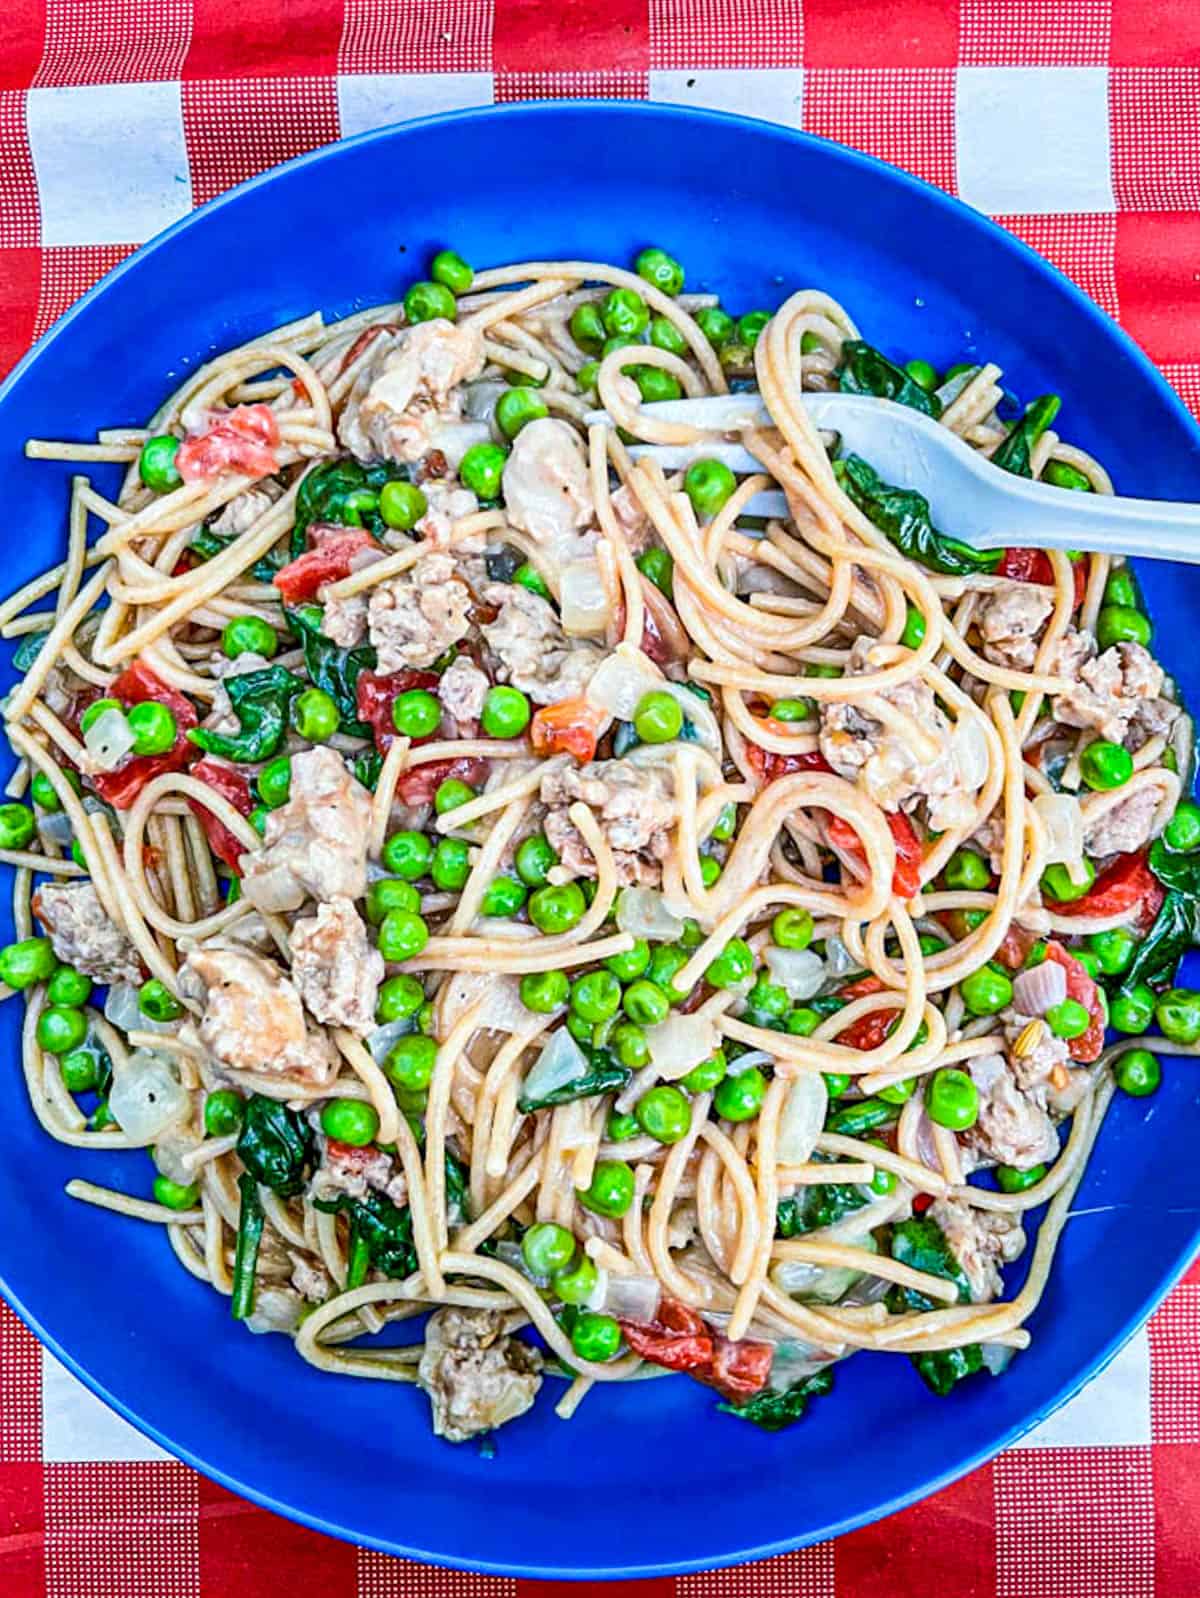 A blue plate on a camp picnic table with spaghetti mixed with turkey sausage and veggies.